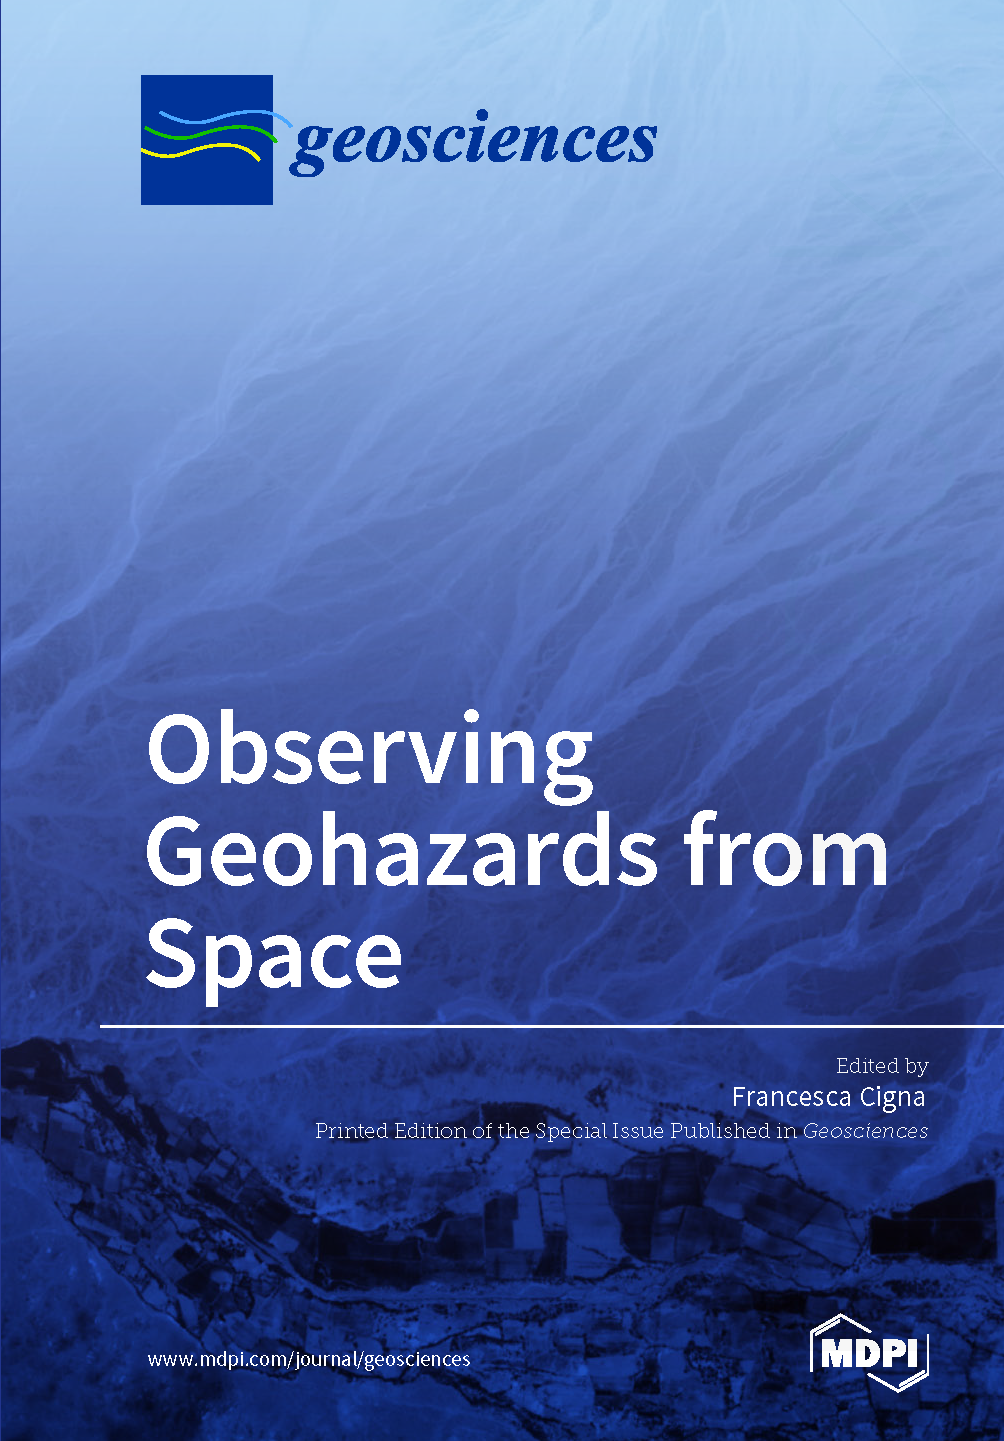 Observing Geohazards from Space